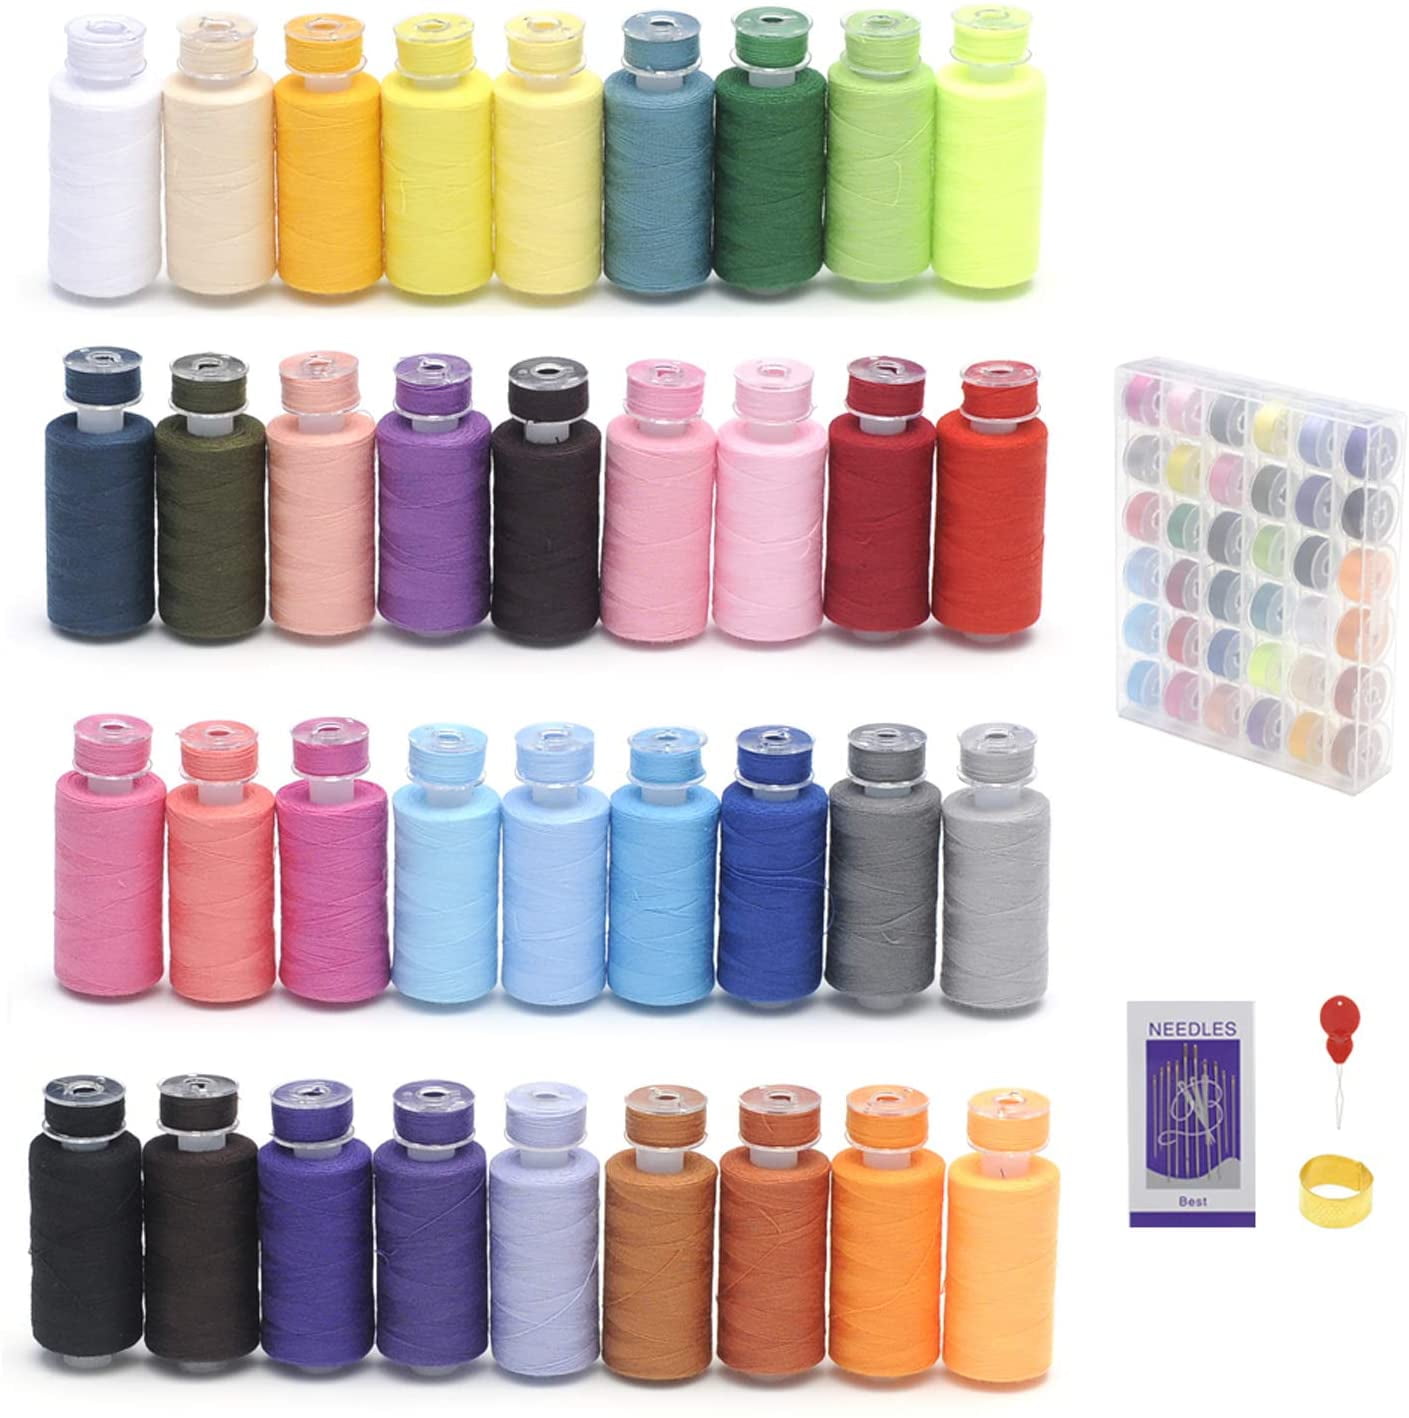 NEW 100 x Assorted 100% Polyester Sewing Thread Spools High Quality BEST PRICE 